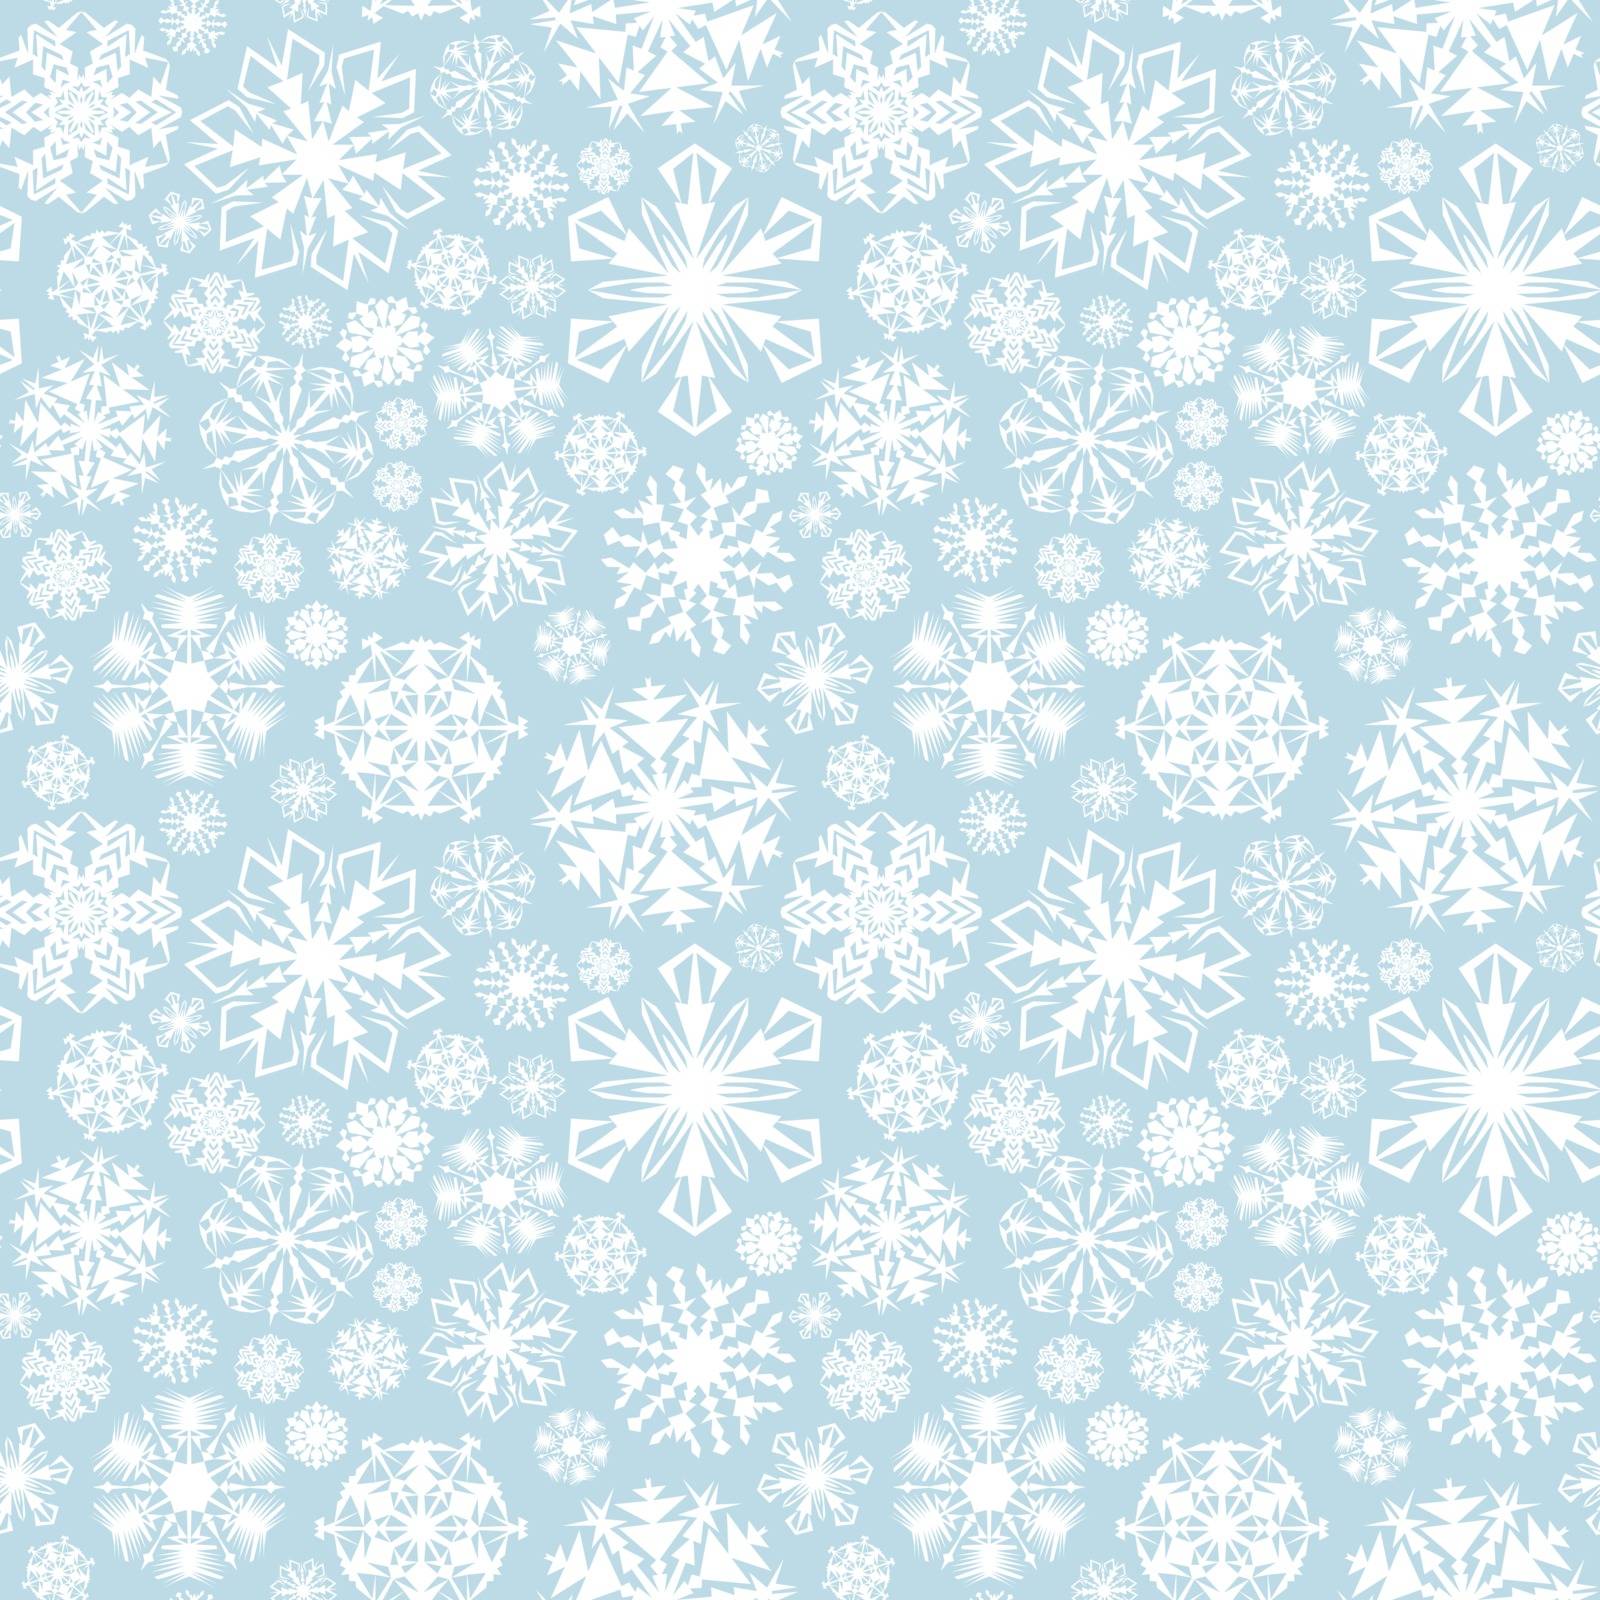 Seamless pattern made of white illustrated snowflakes on blue background